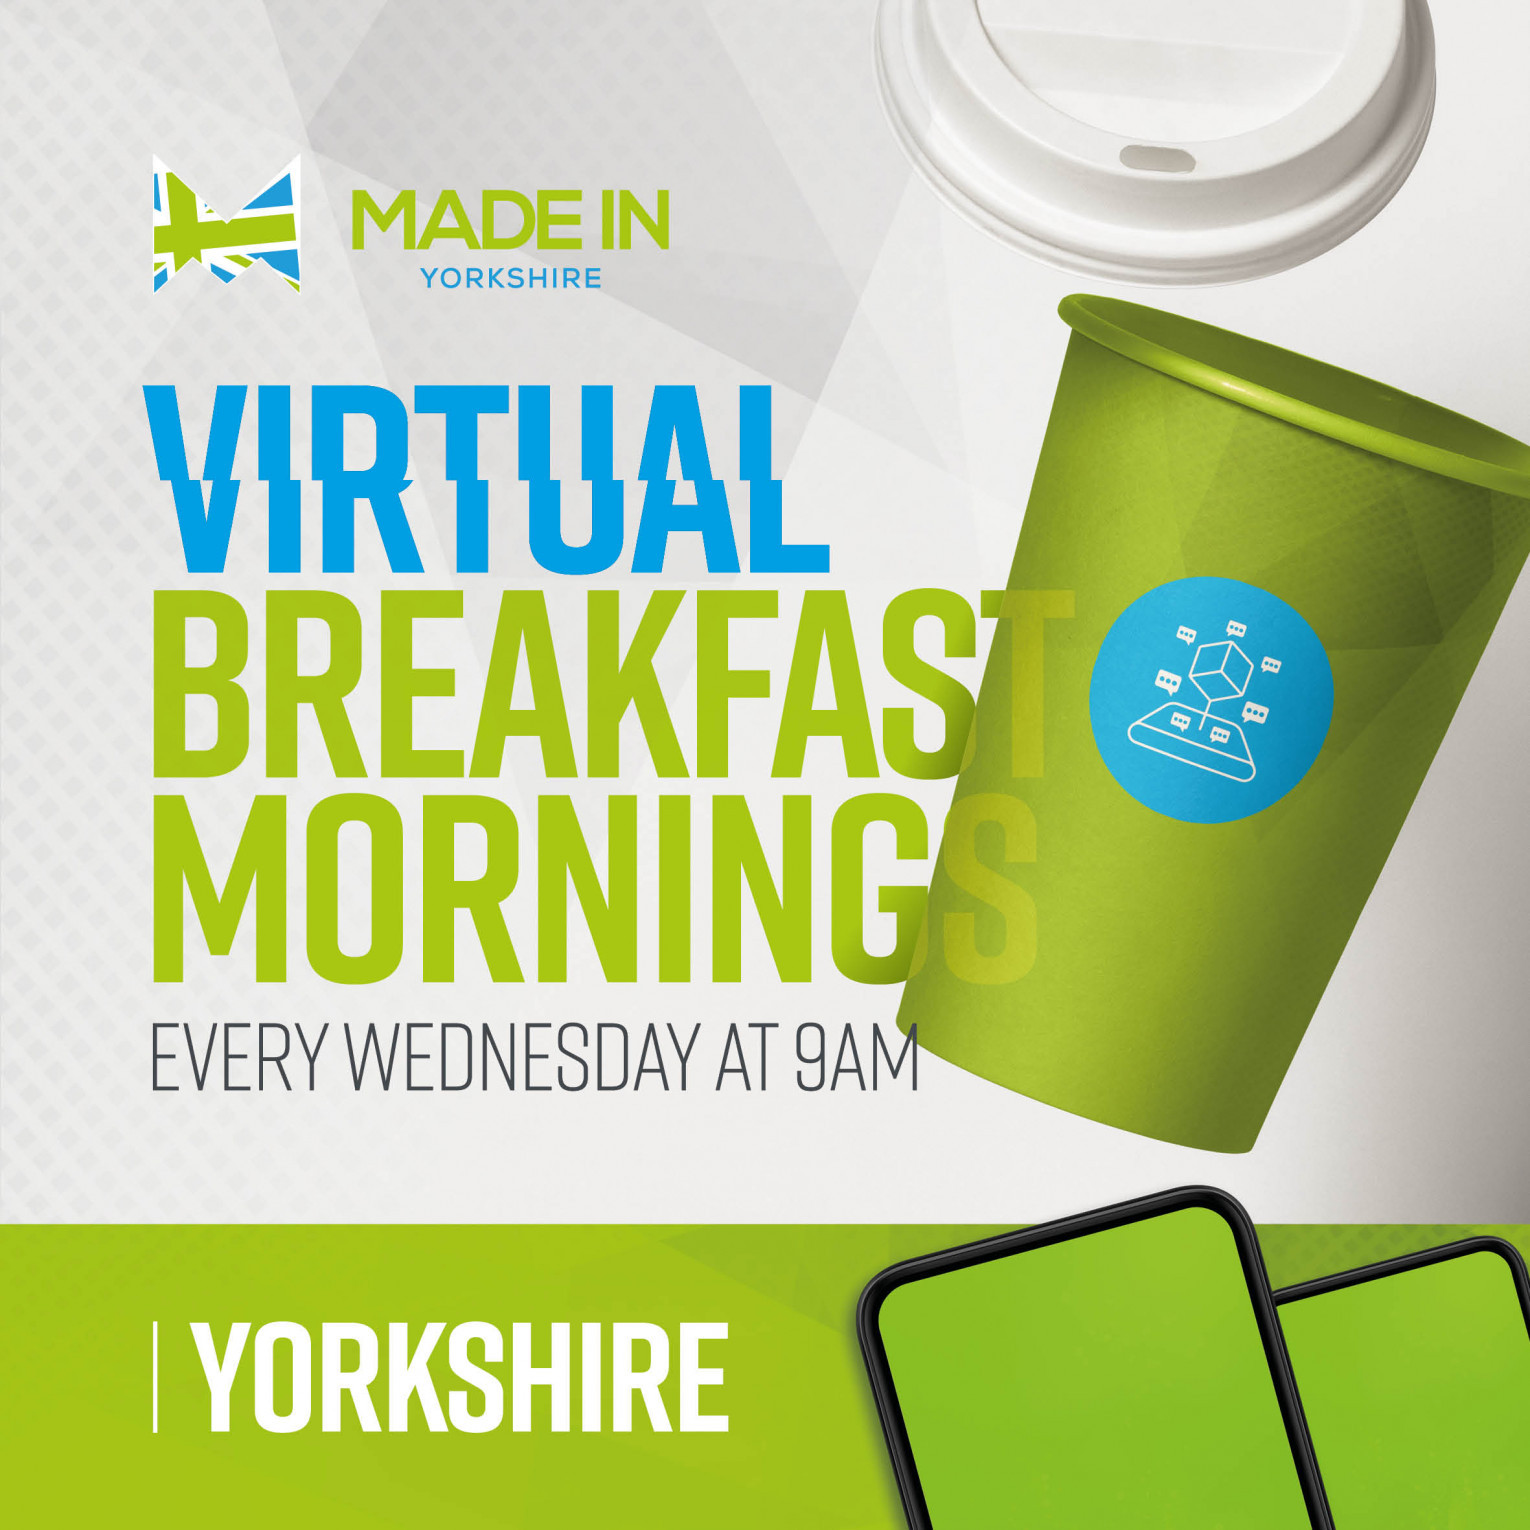 Made in Yorkshire Virtual Breakfast Morning with Crompton Controls